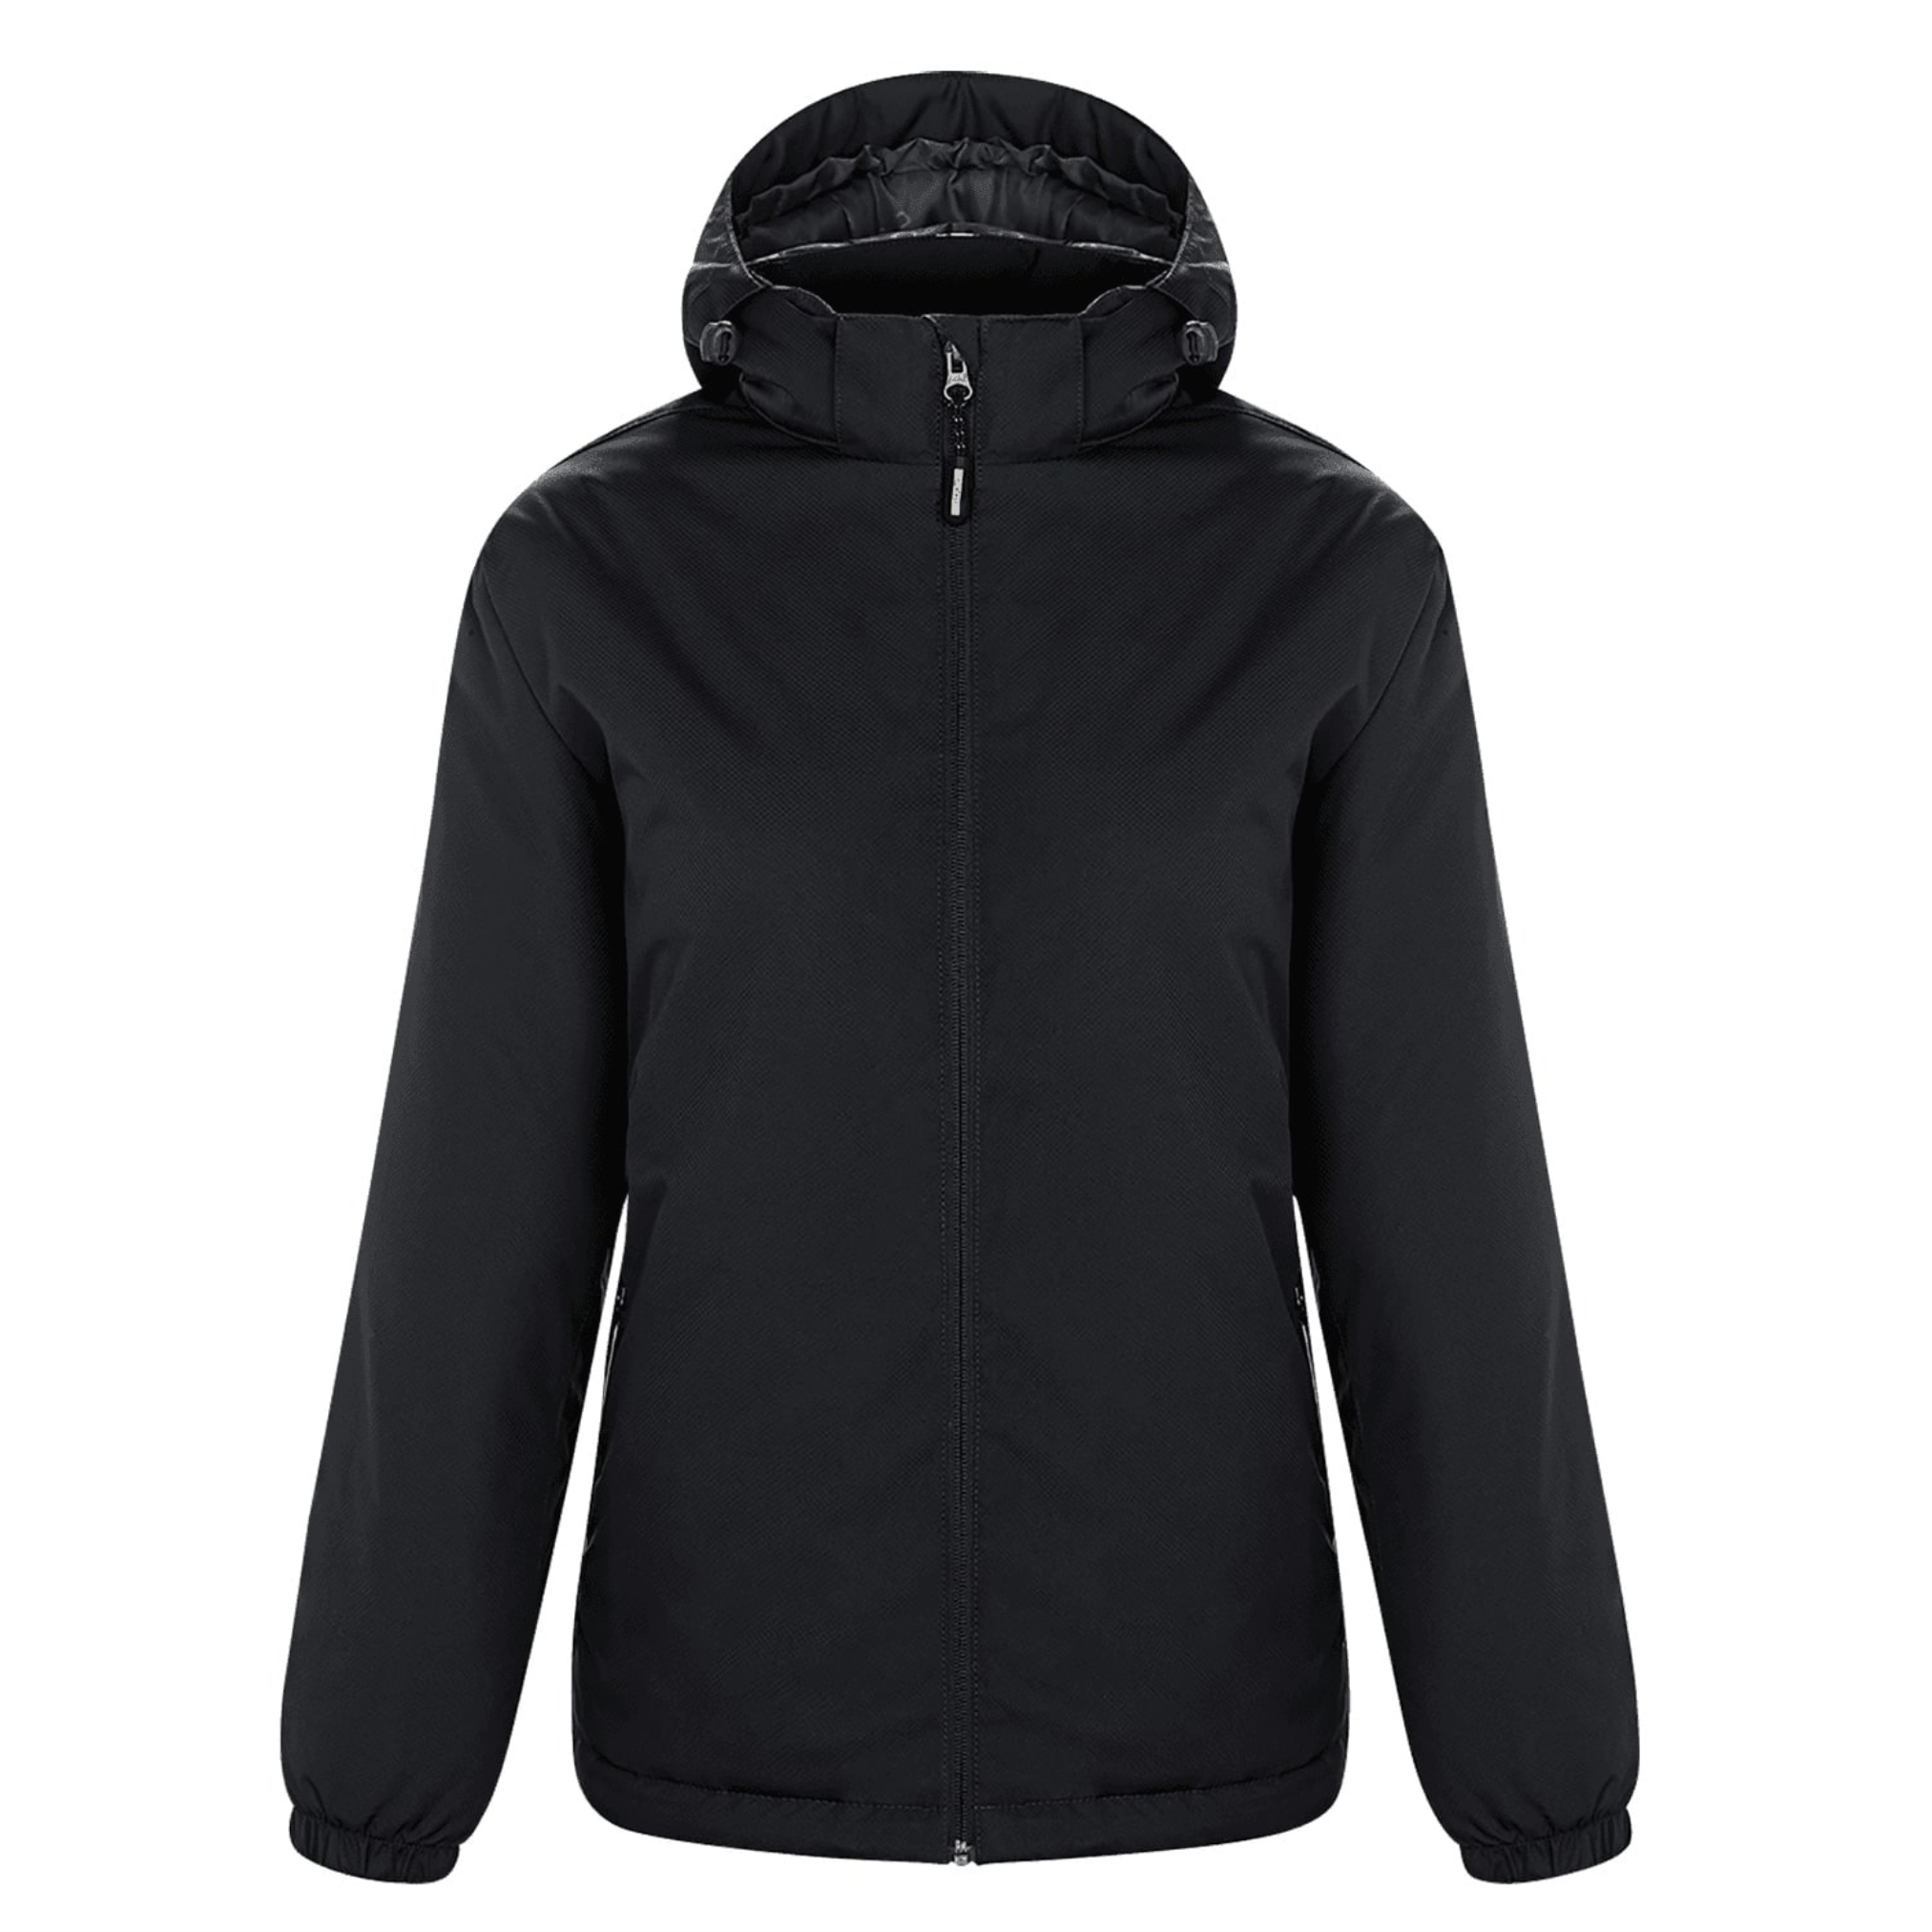 Playmaker - Insulated Ladies Jacket - CX2 L03401